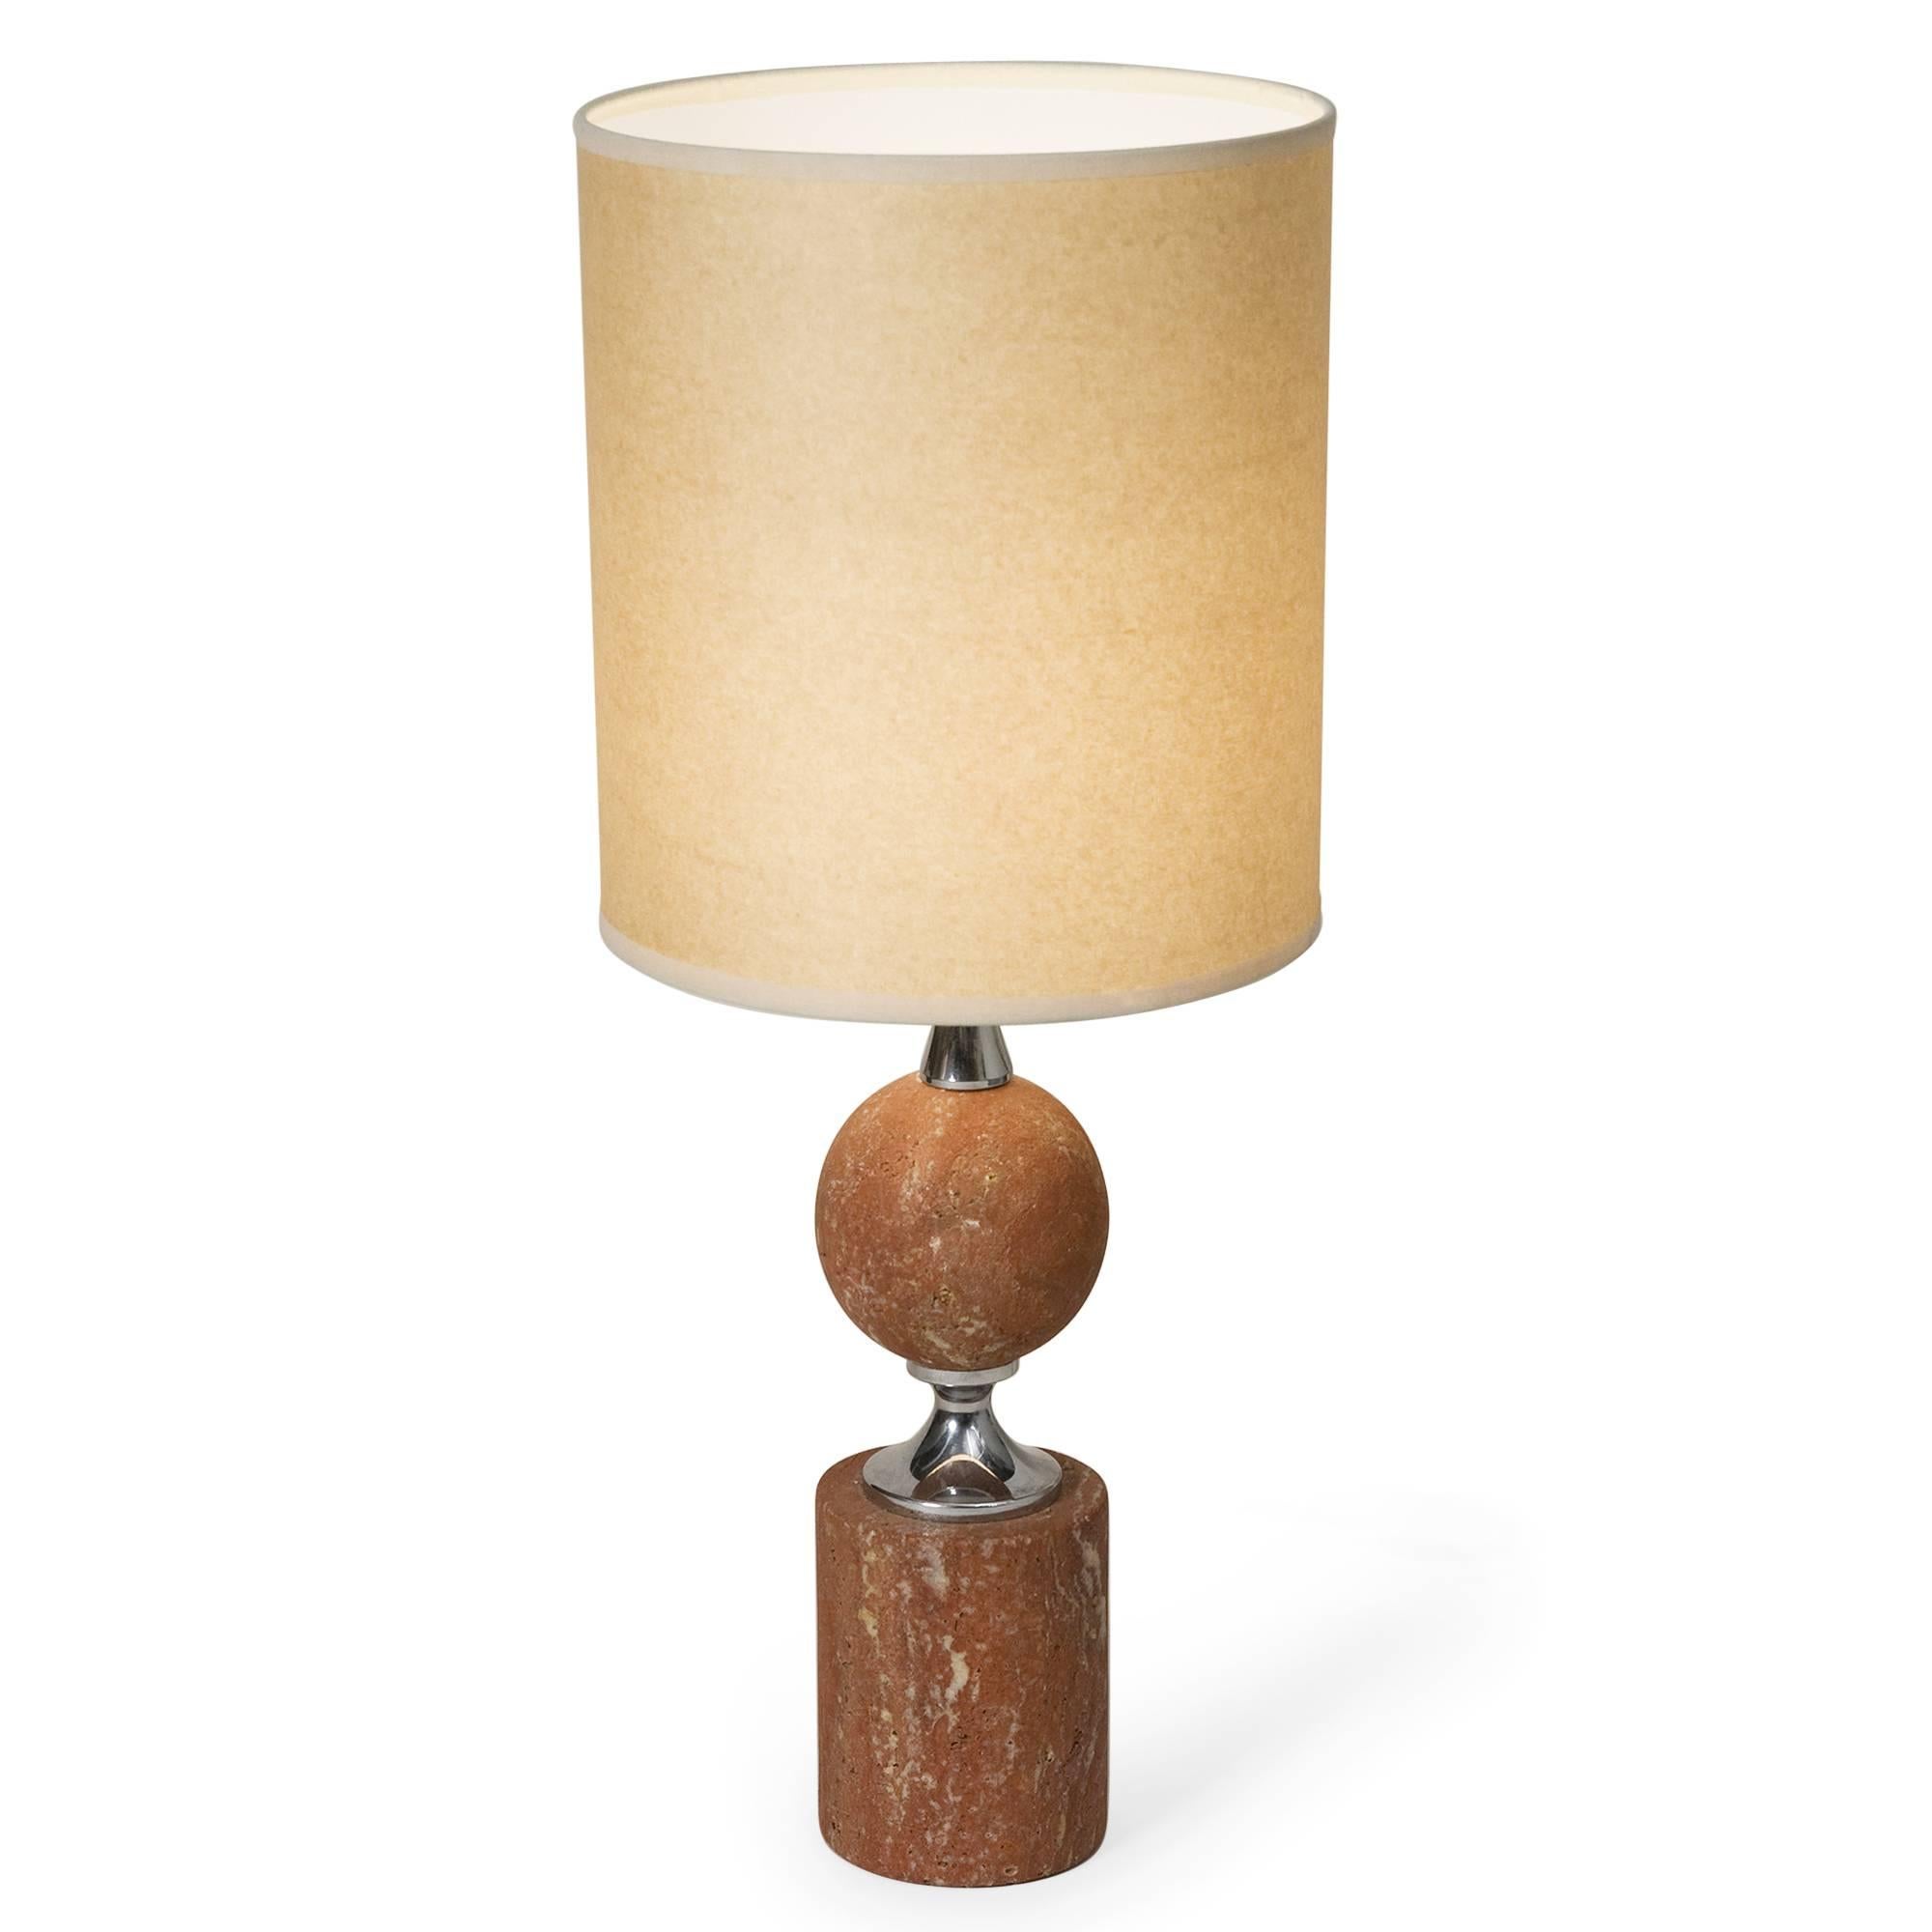 Rouge travertine and chrome table lamp, the circular column base surmounted by an spherical shape, in custom marbled paper shade by Barbier, French, 1970s. Measures: Overall height 22 1/2 in, shade measures diameter 9 in, height 10 in, base has 4 in